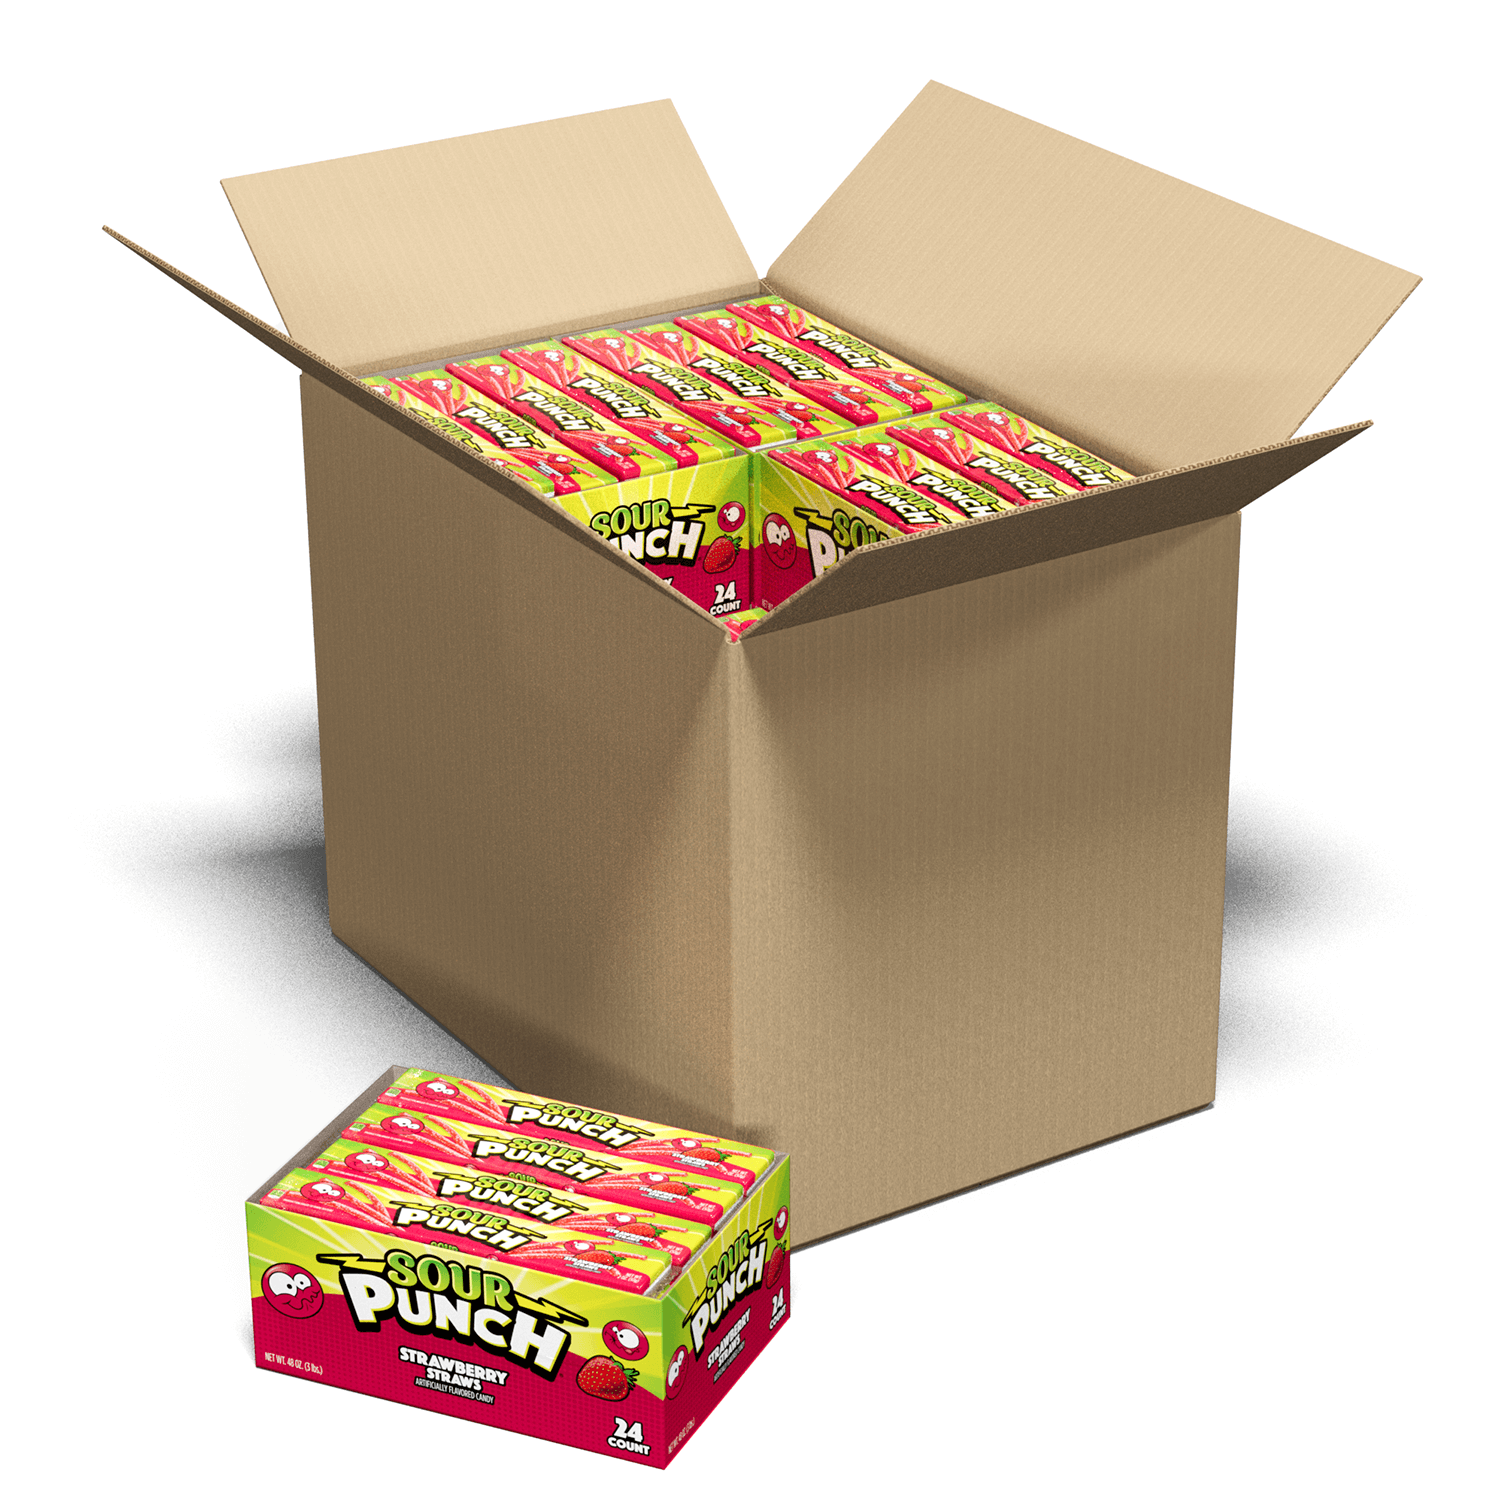 Case of Sour Punch 2oz Strawberry Straws Trays in Caddies